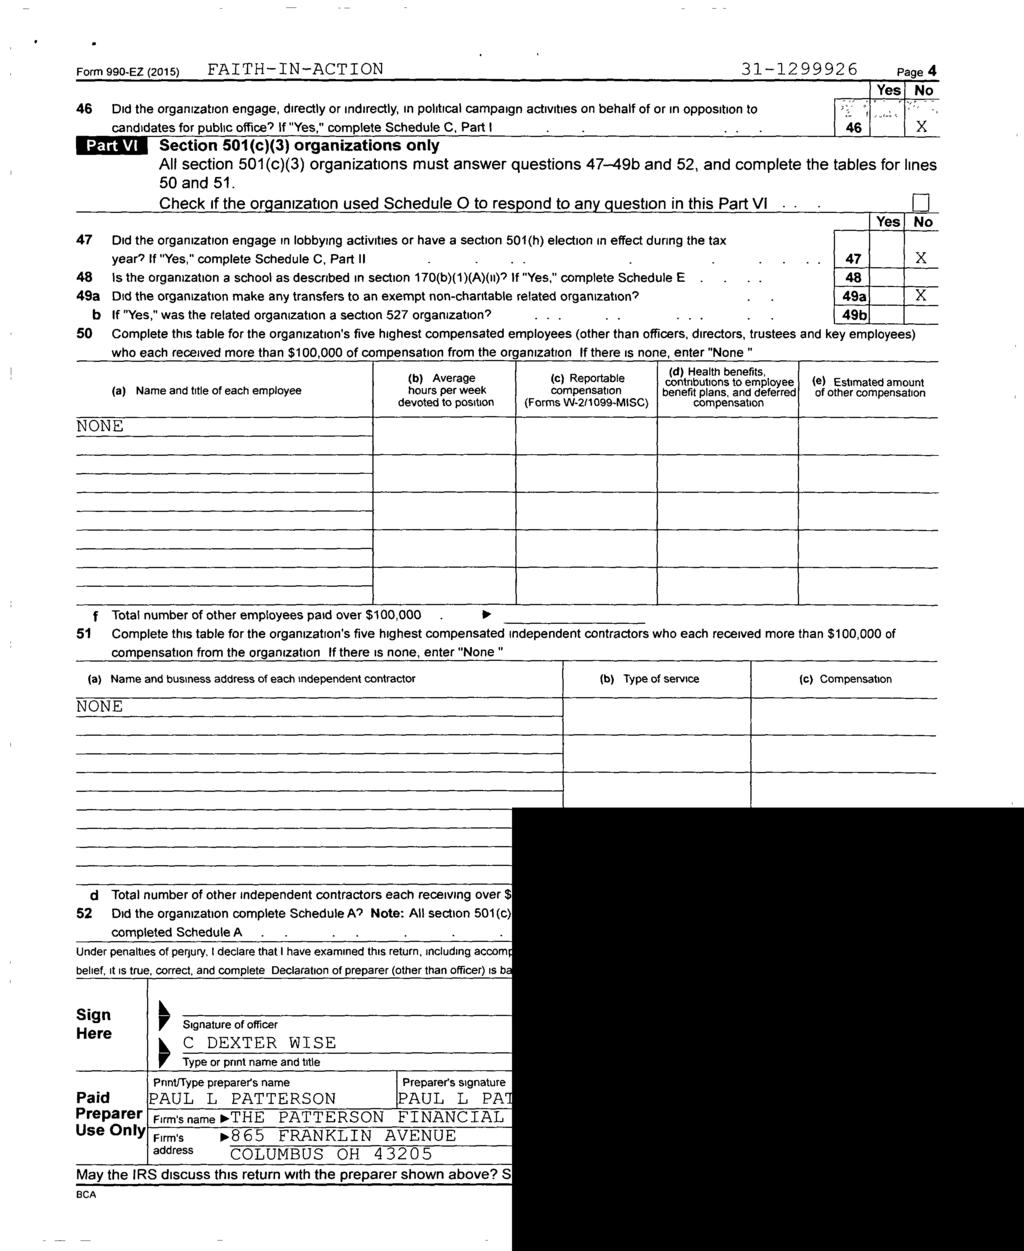 Form 990-EZ (2015 ) FAI TH-IN-A CT ION 31-1299926 le 4 No 46 Did the organization engage, directly or indirectly, in political campaign activities on behalf of or in opposition to candidates for